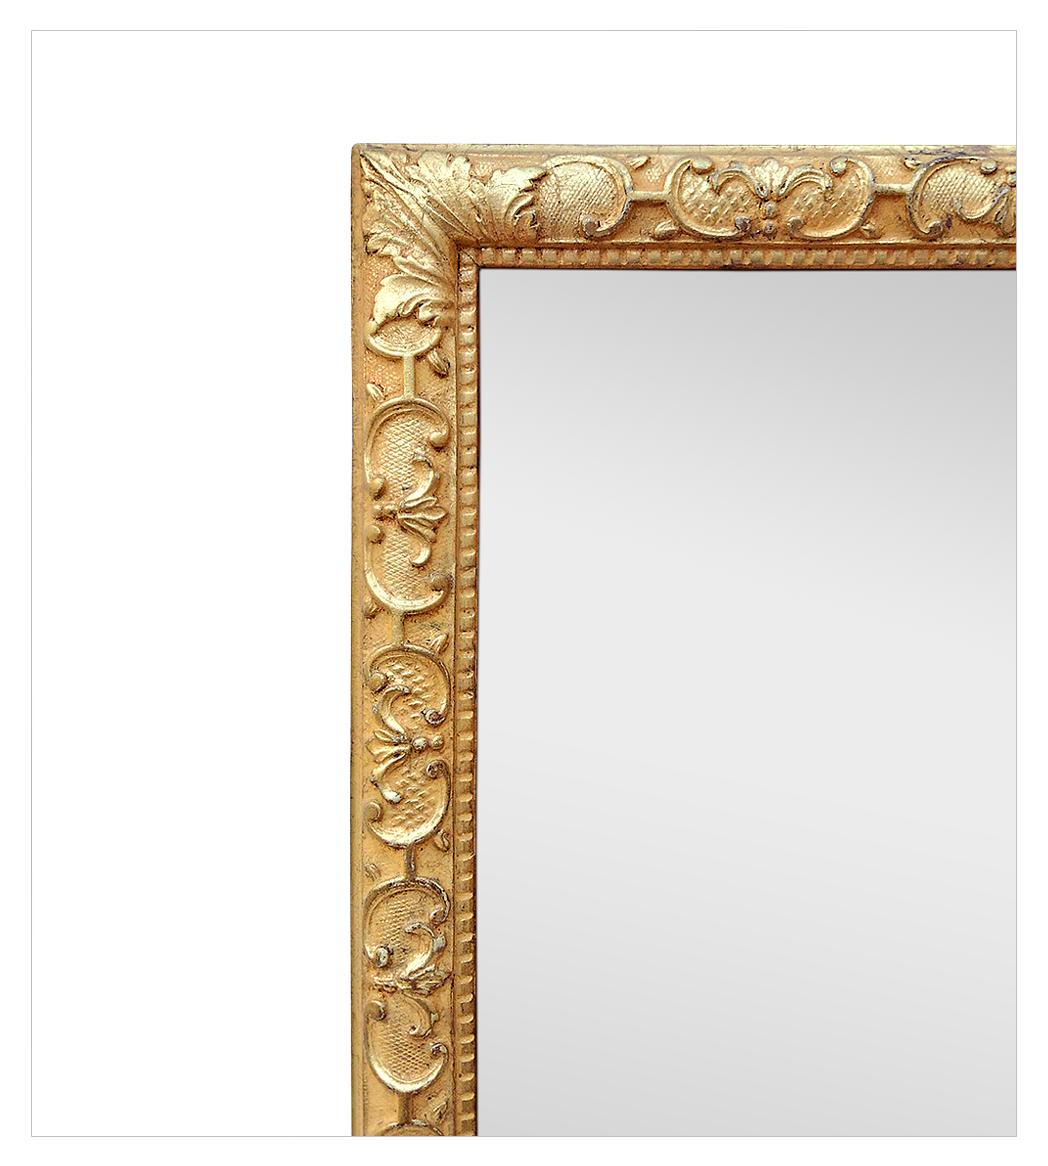 Antique French Giltwood Mirror, 17th Century Style Ornaments, circa 1930 For Sale 1